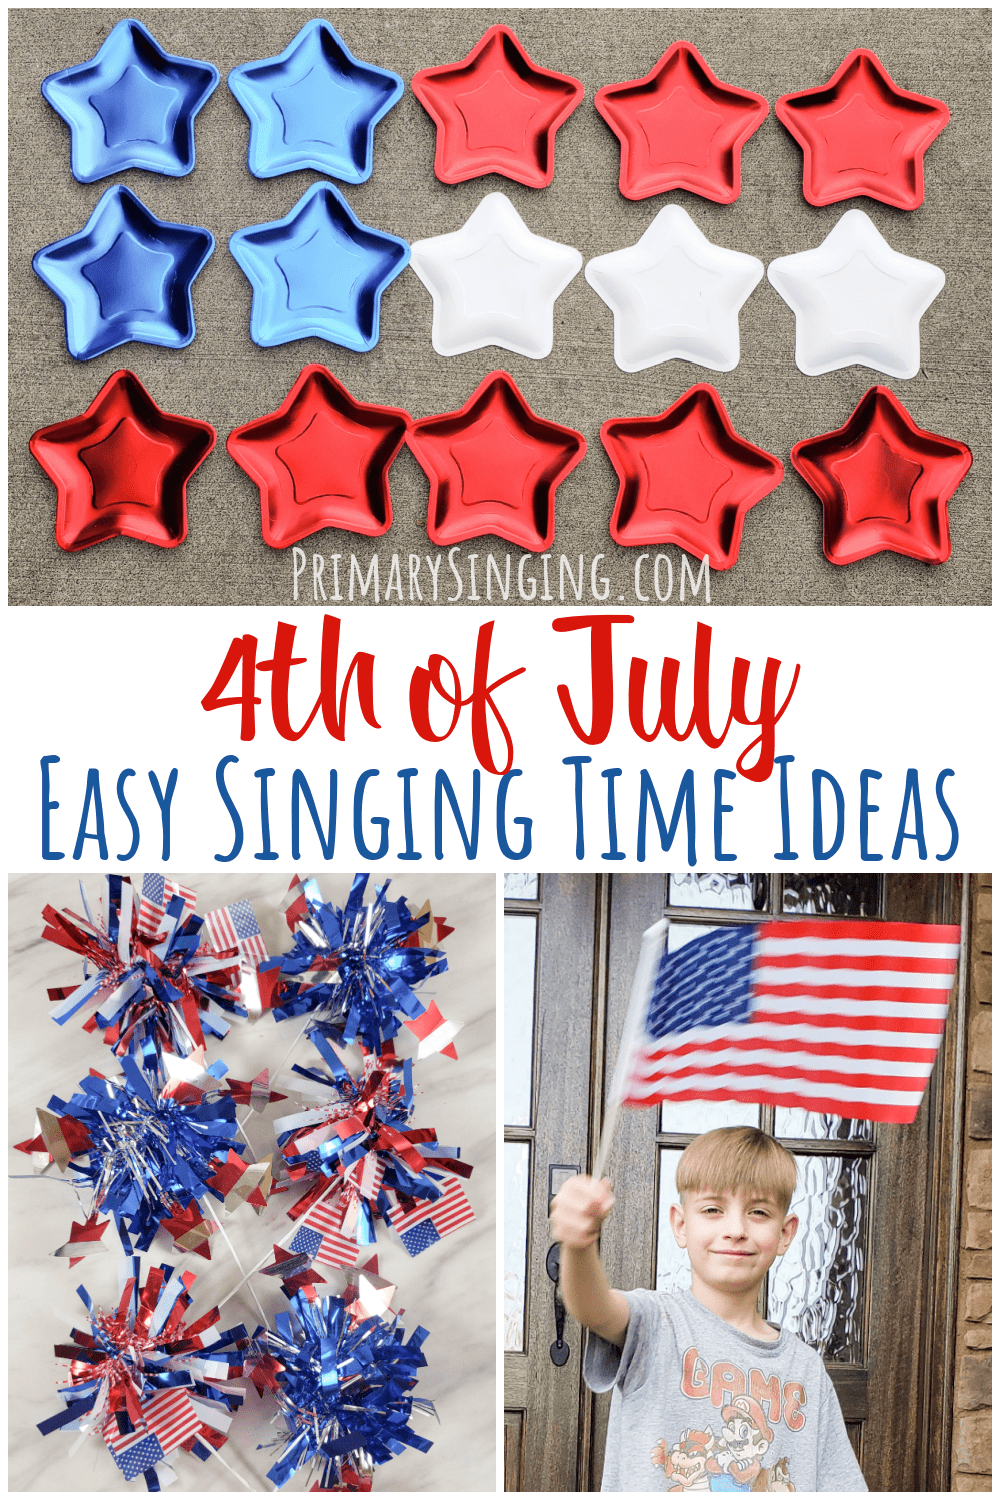 10 fun and easy Patriotic 4th of July Singing time ideas for LDS Primary music leaders!! Finger lights, pom poms, paper plate flag, write/color in a flag, wave the flag, and more fun ideas! 